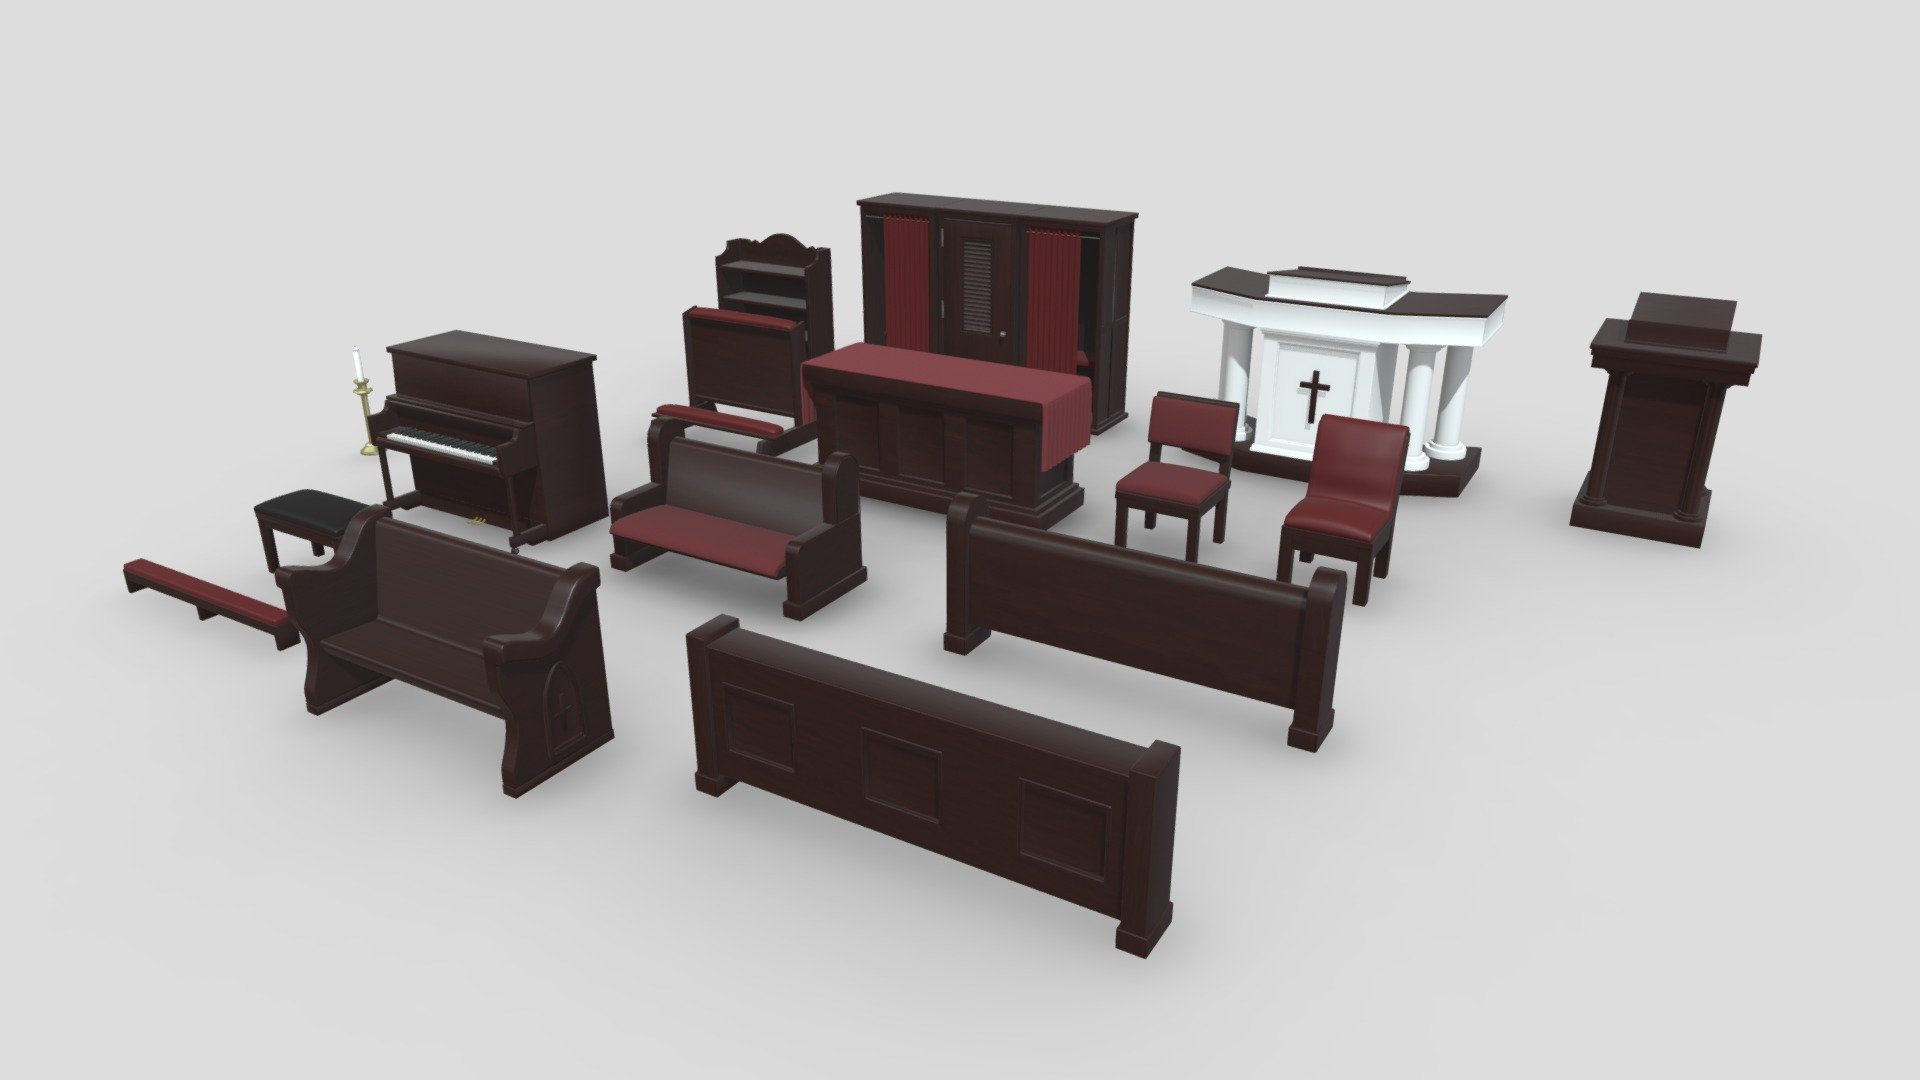 Church Asset Collection that was created using Blender. This is the third version of my Church Furniture Collection and includes some new models as well as remakes of some of the more popular models in previous versions. New models have better topology, materials, and textures.

Features:




Objects use the metalness workflow and PBR textures in PNG format

Collection includes 16 models

Each object has been manually unwrapped to match their PBR textures

Blend files are included for each model in the set with pre-applied textures

Models have been exported in 3 file formats (FBX, OBJ, DAE/Collada)

Models have been exported as separate files as well as a set

Included Textures:




AO, Diffuse, Roughness, Gloss, Metallic, Normal

UVLayout

The source file that is uploaded is for demonstration use and is uploaded in FBX format. In the additional file you will find all model exports and the textures that go along with them 3d model